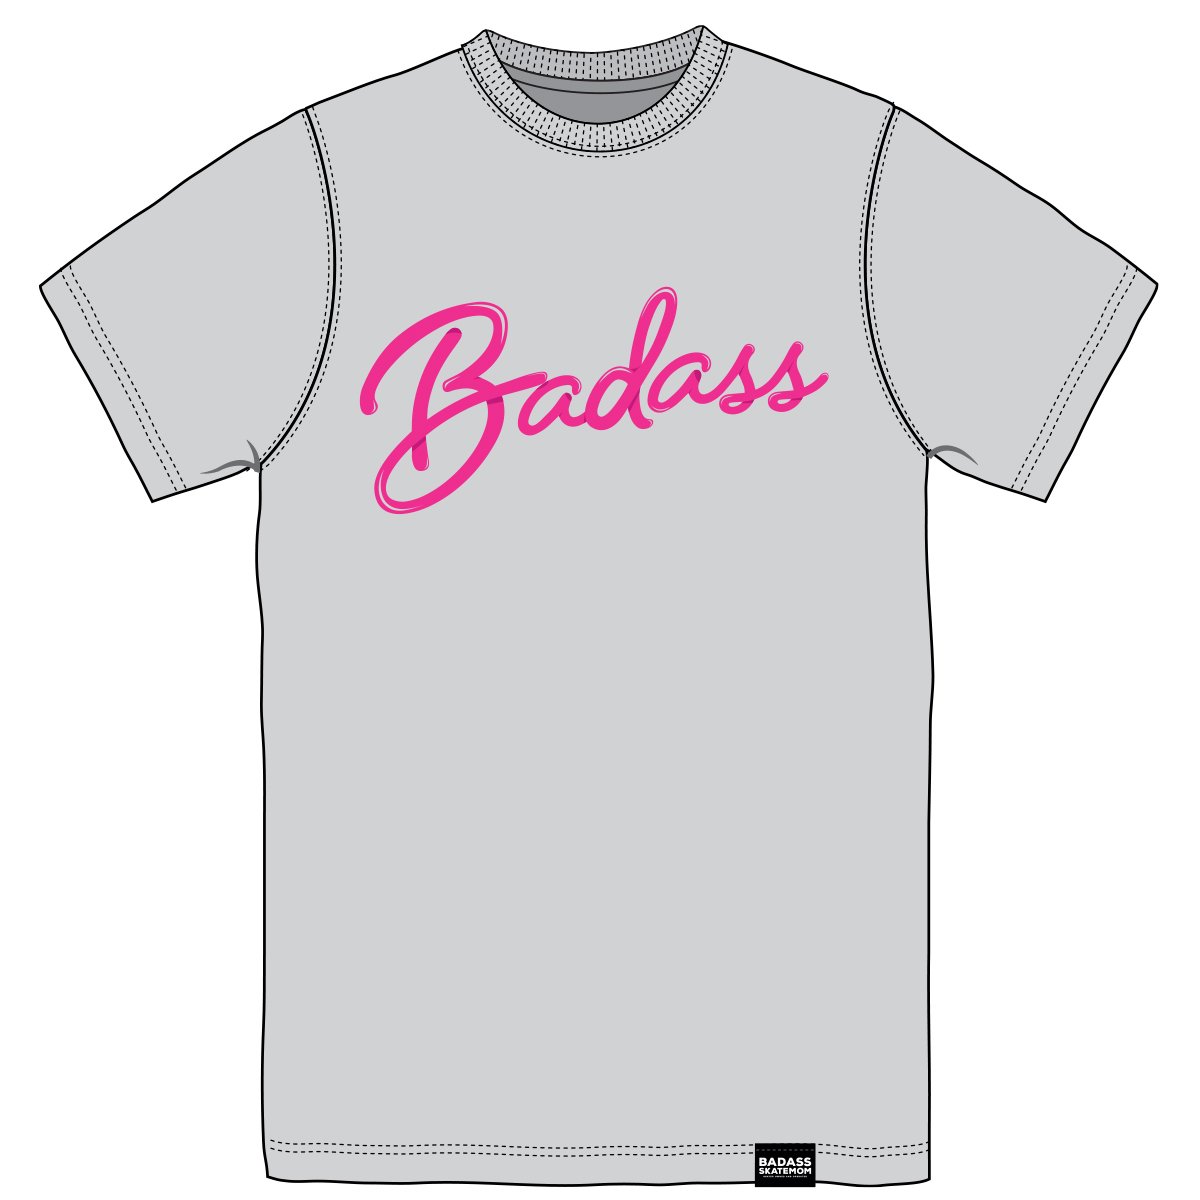 Image of New in-stock Badass Script and Be Badass Everyday on the back